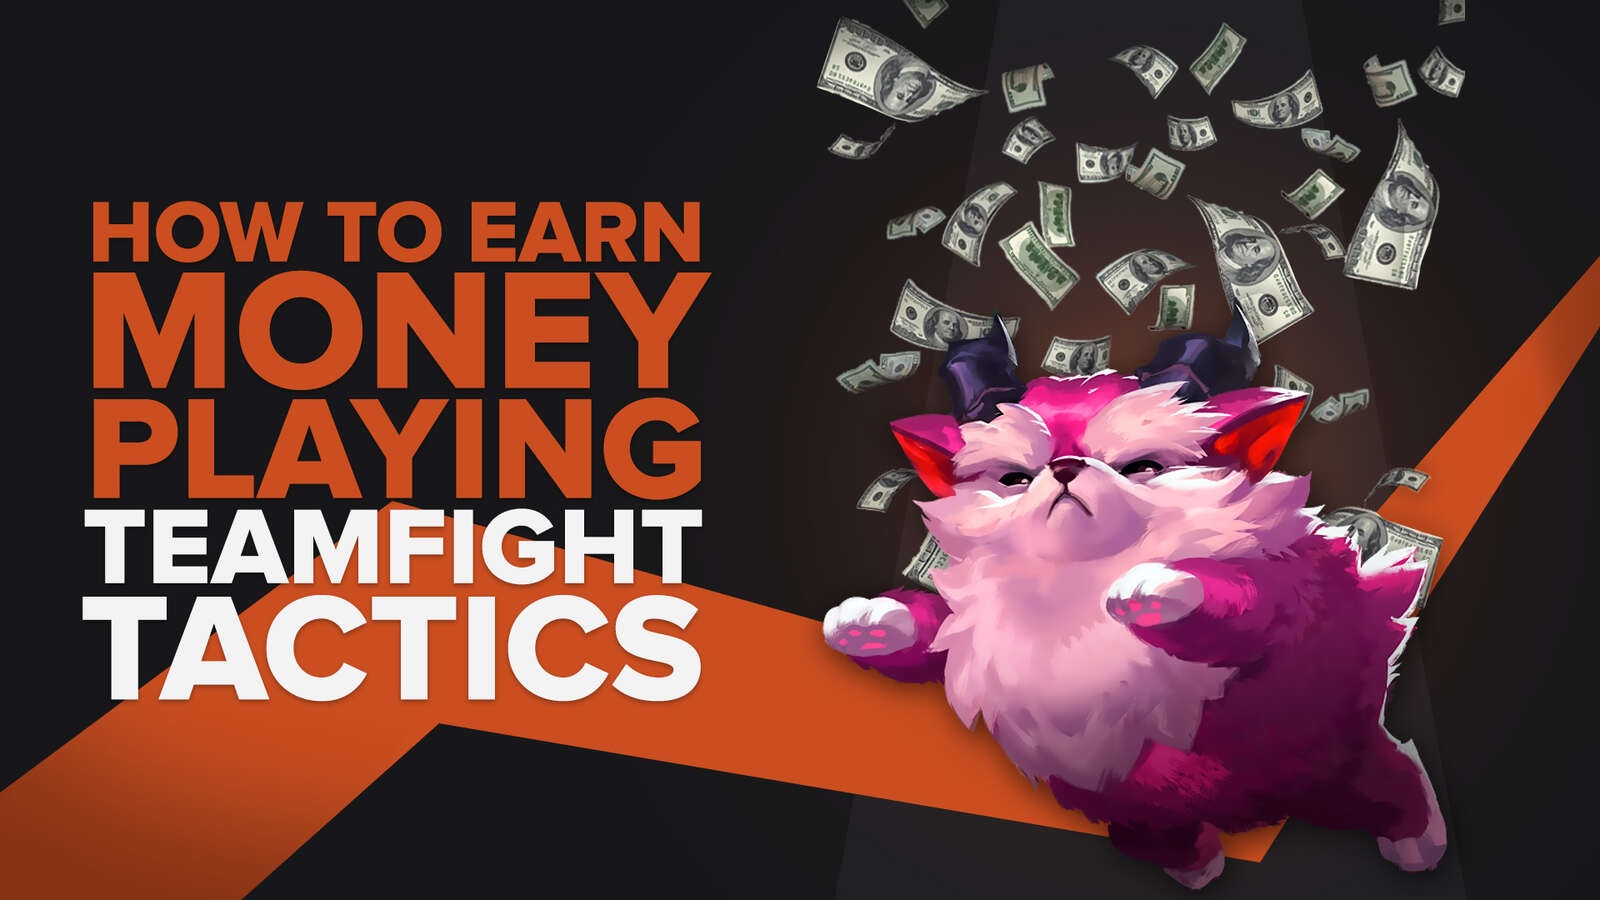 How To Earn Money Playing Teamfight Tactics